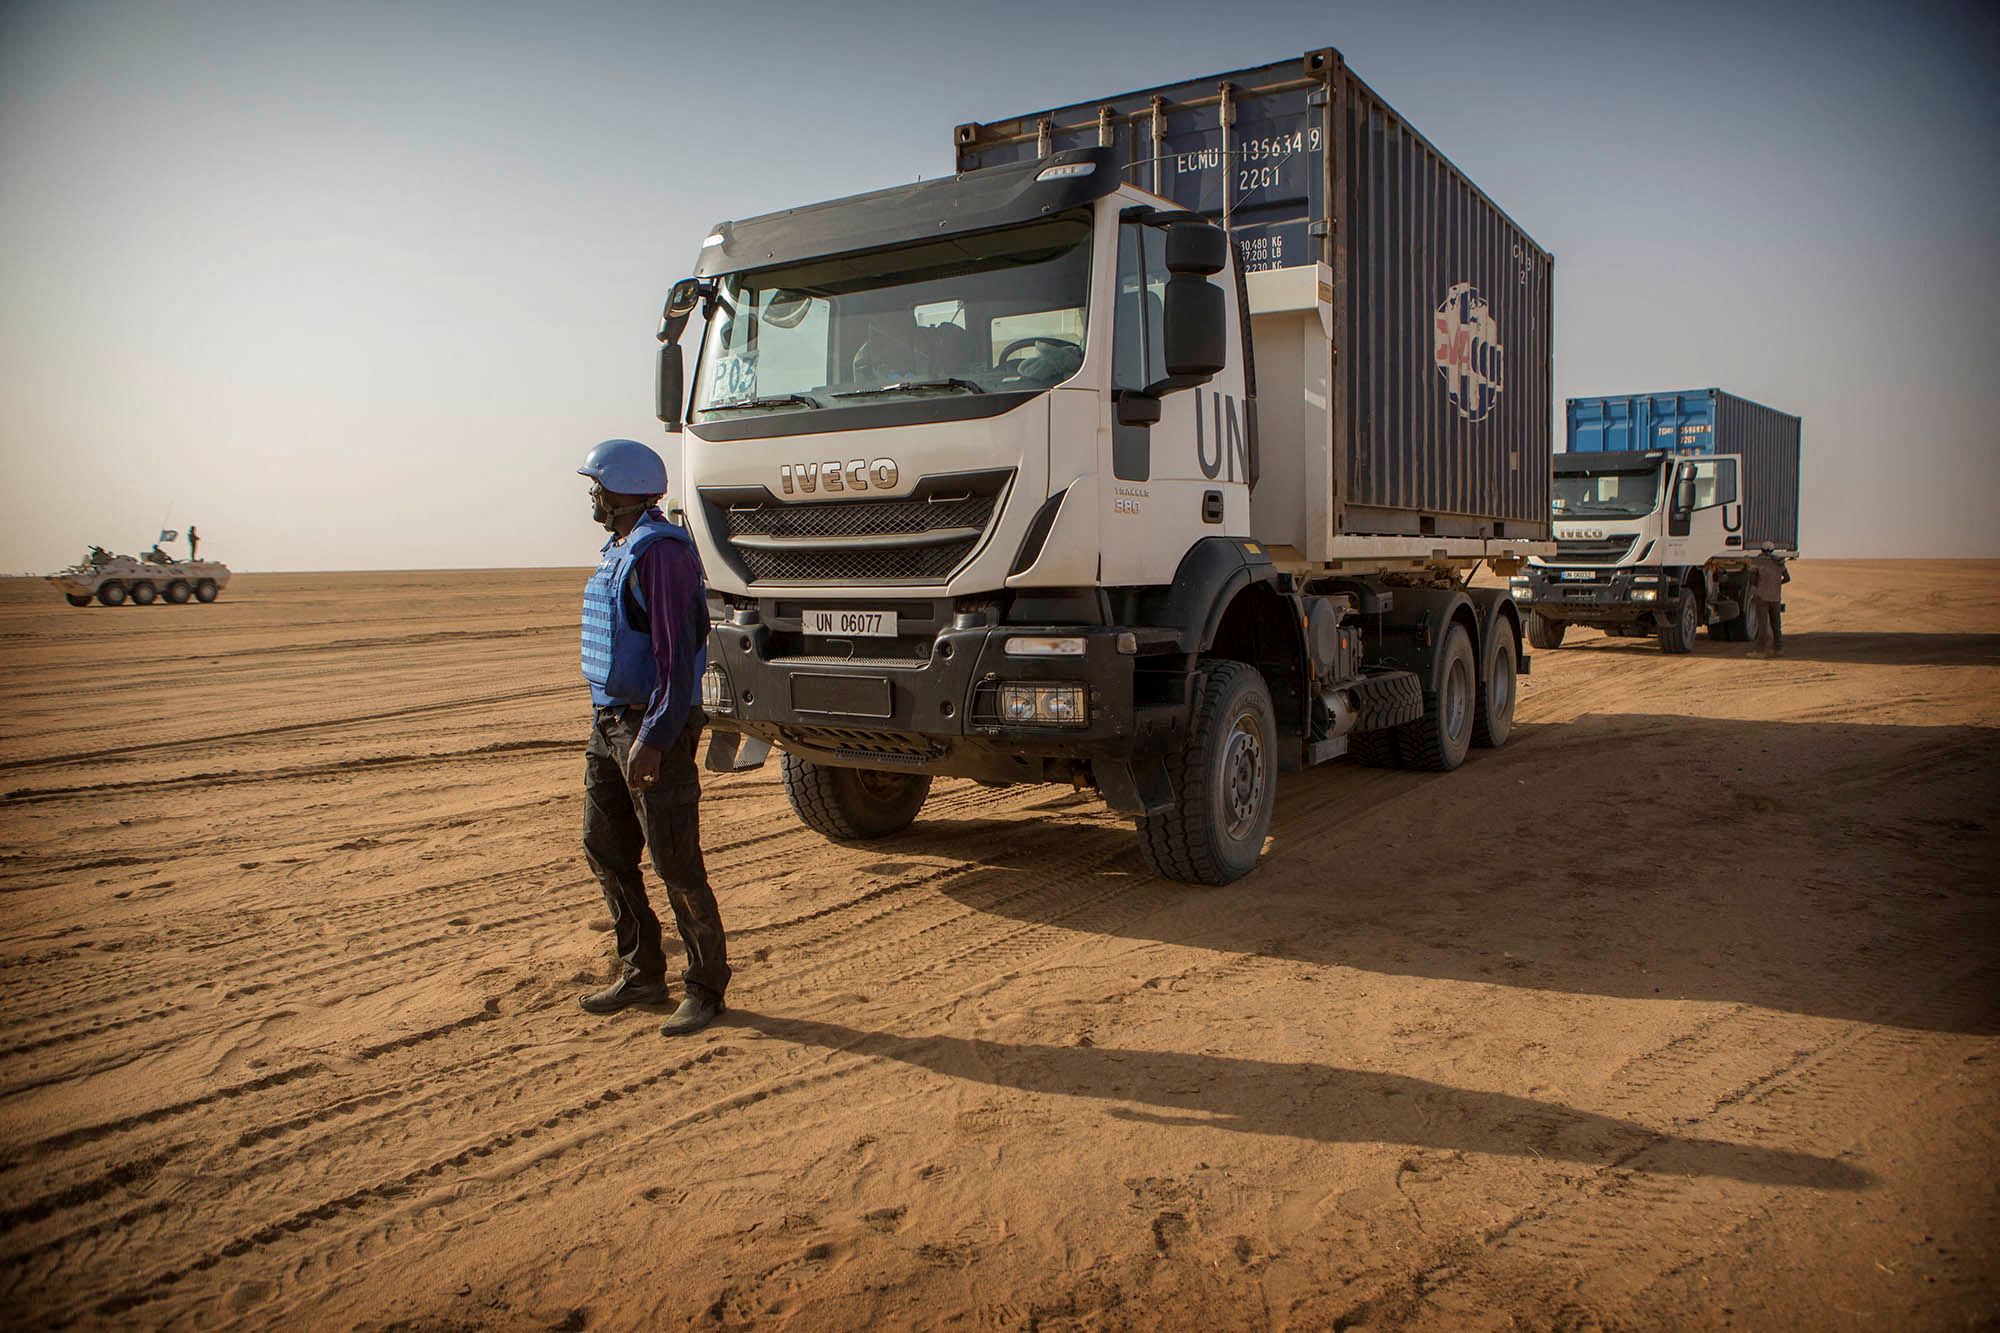 A MINUSMA logistic convoy is pictured in Kidal